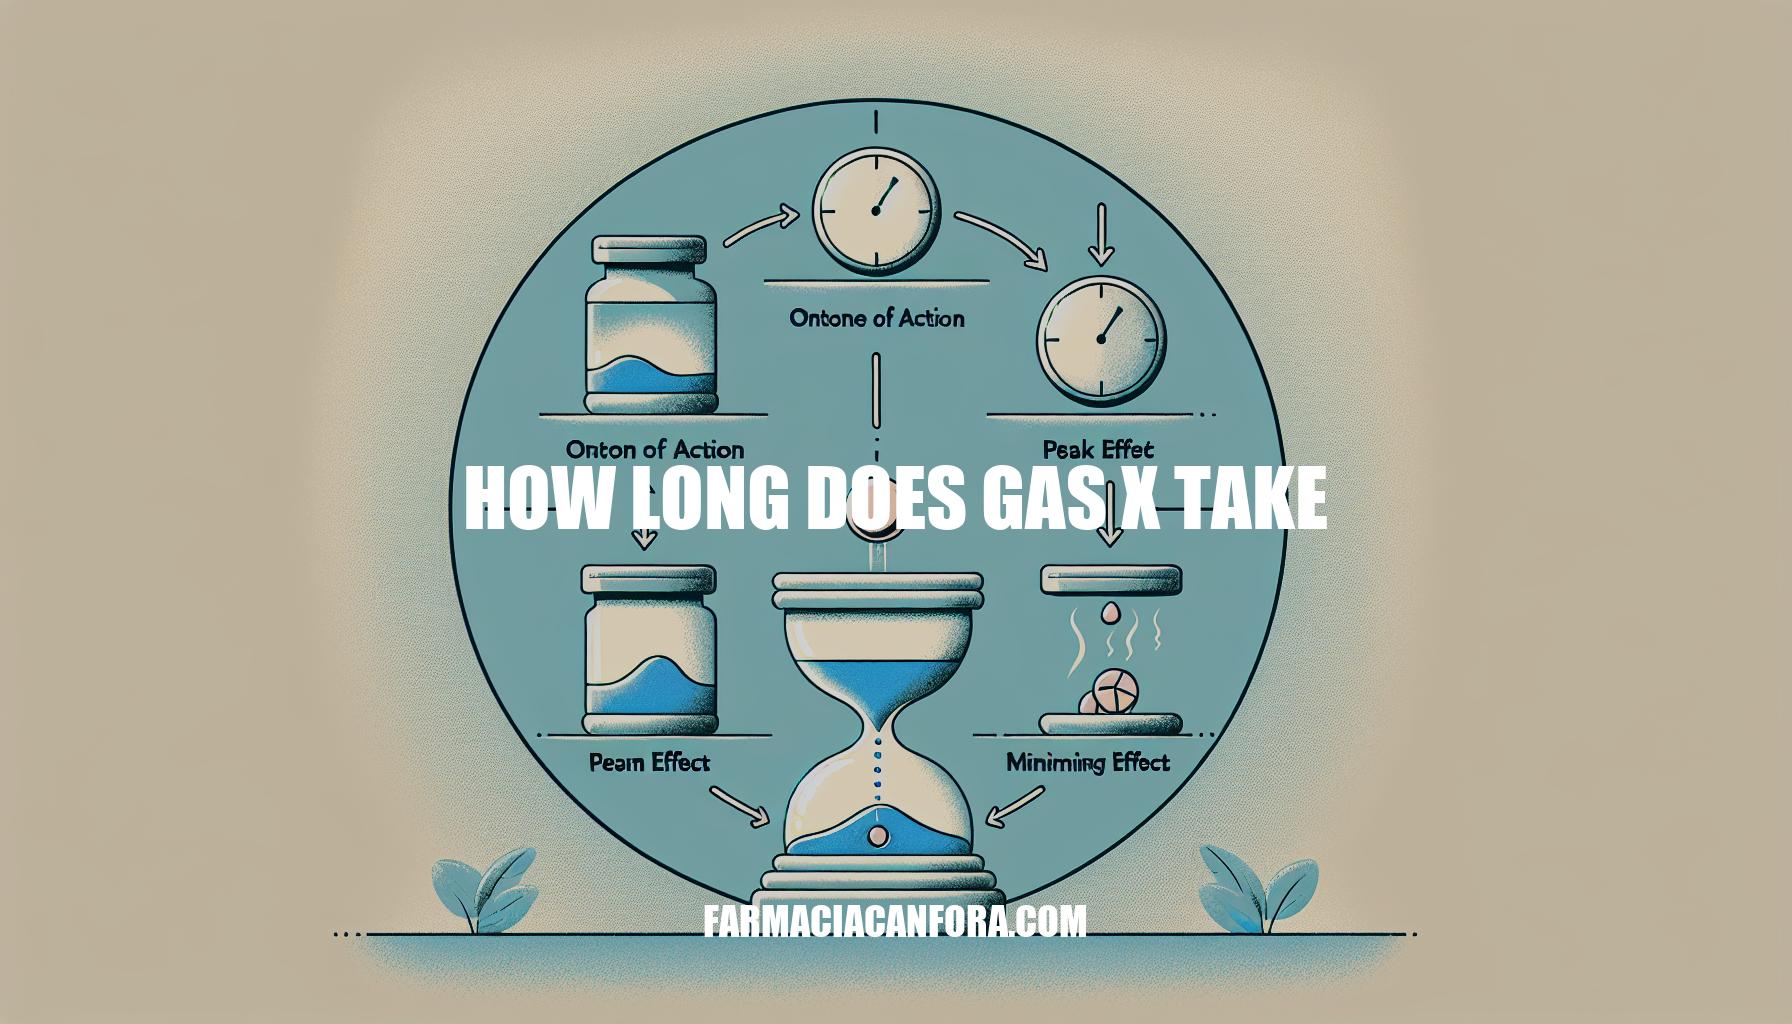 How Long Does Gas-X Take to Work?